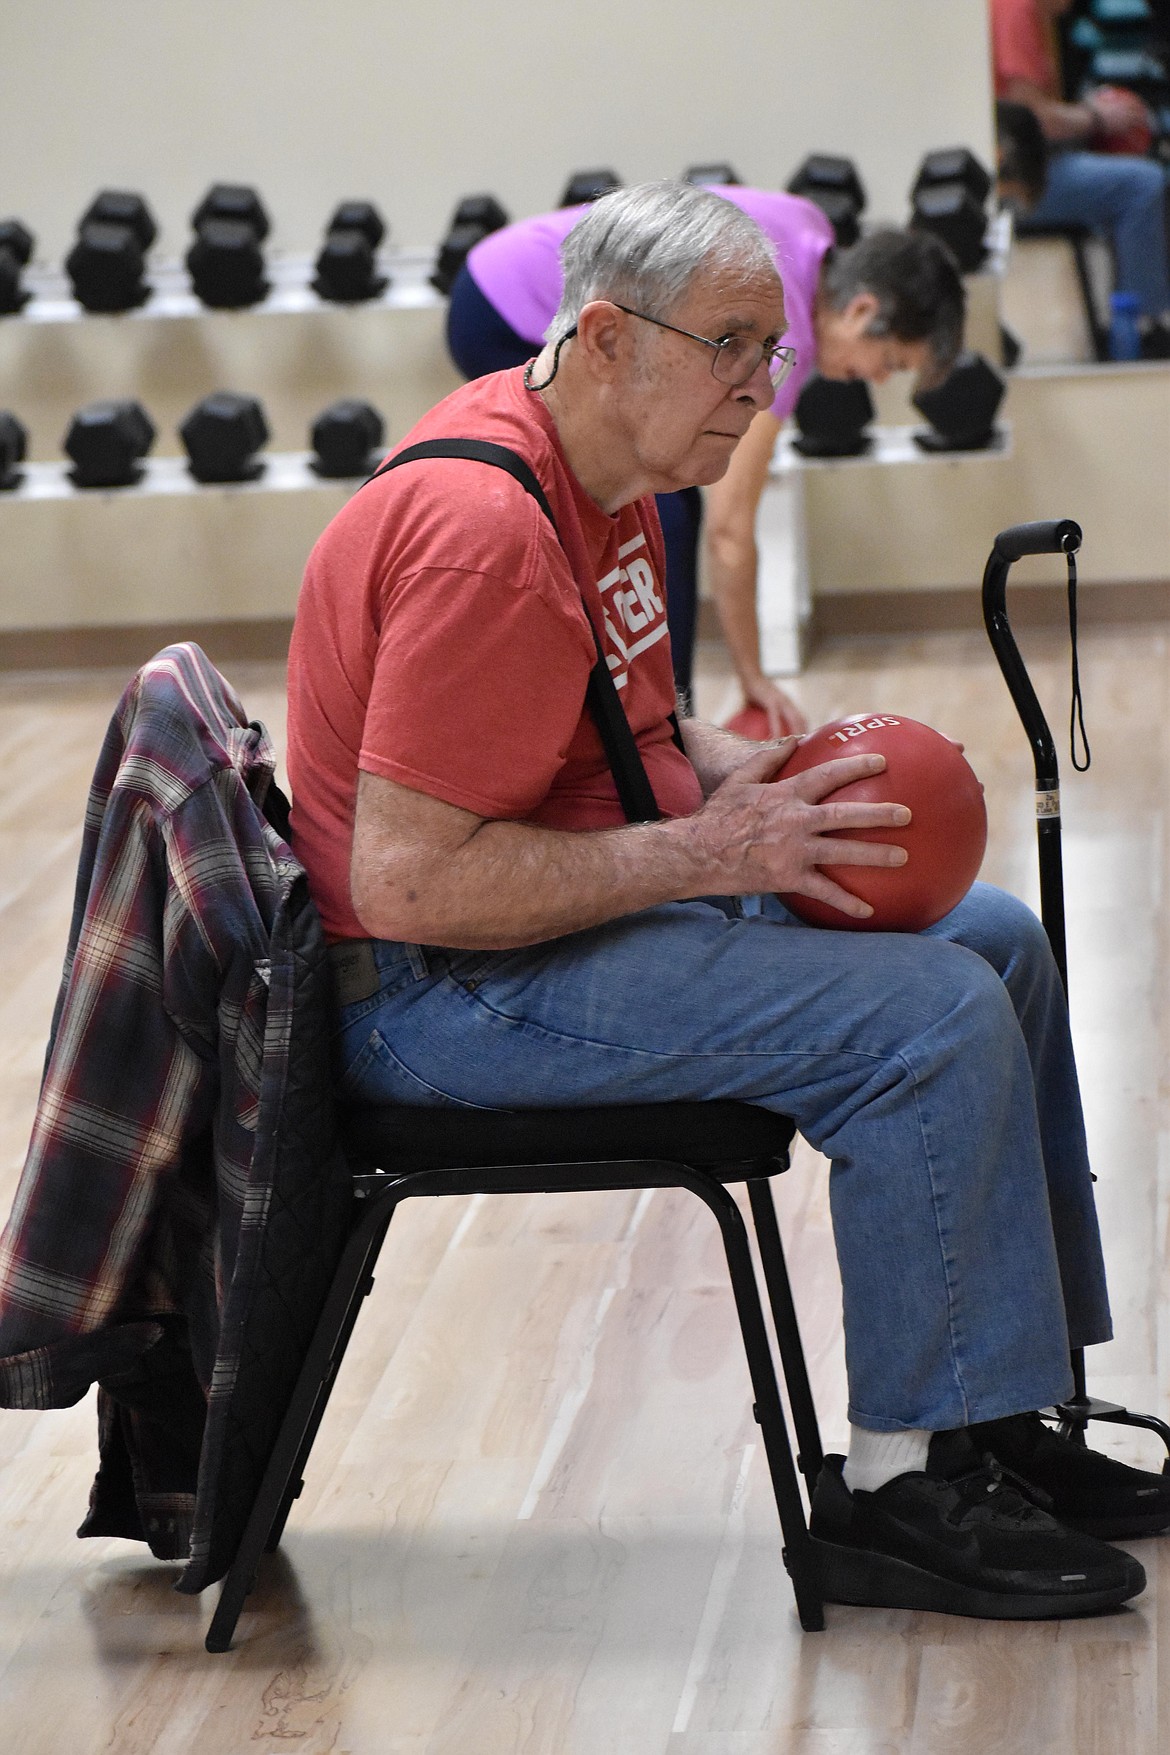 Senior fitness classes are held Monday, Wednesday and Friday at 8 a.m. at South Campus Athletic Club, located at 1475 E Nelson Rd, Moses Lake. The classes are held in the second level group exercise room.